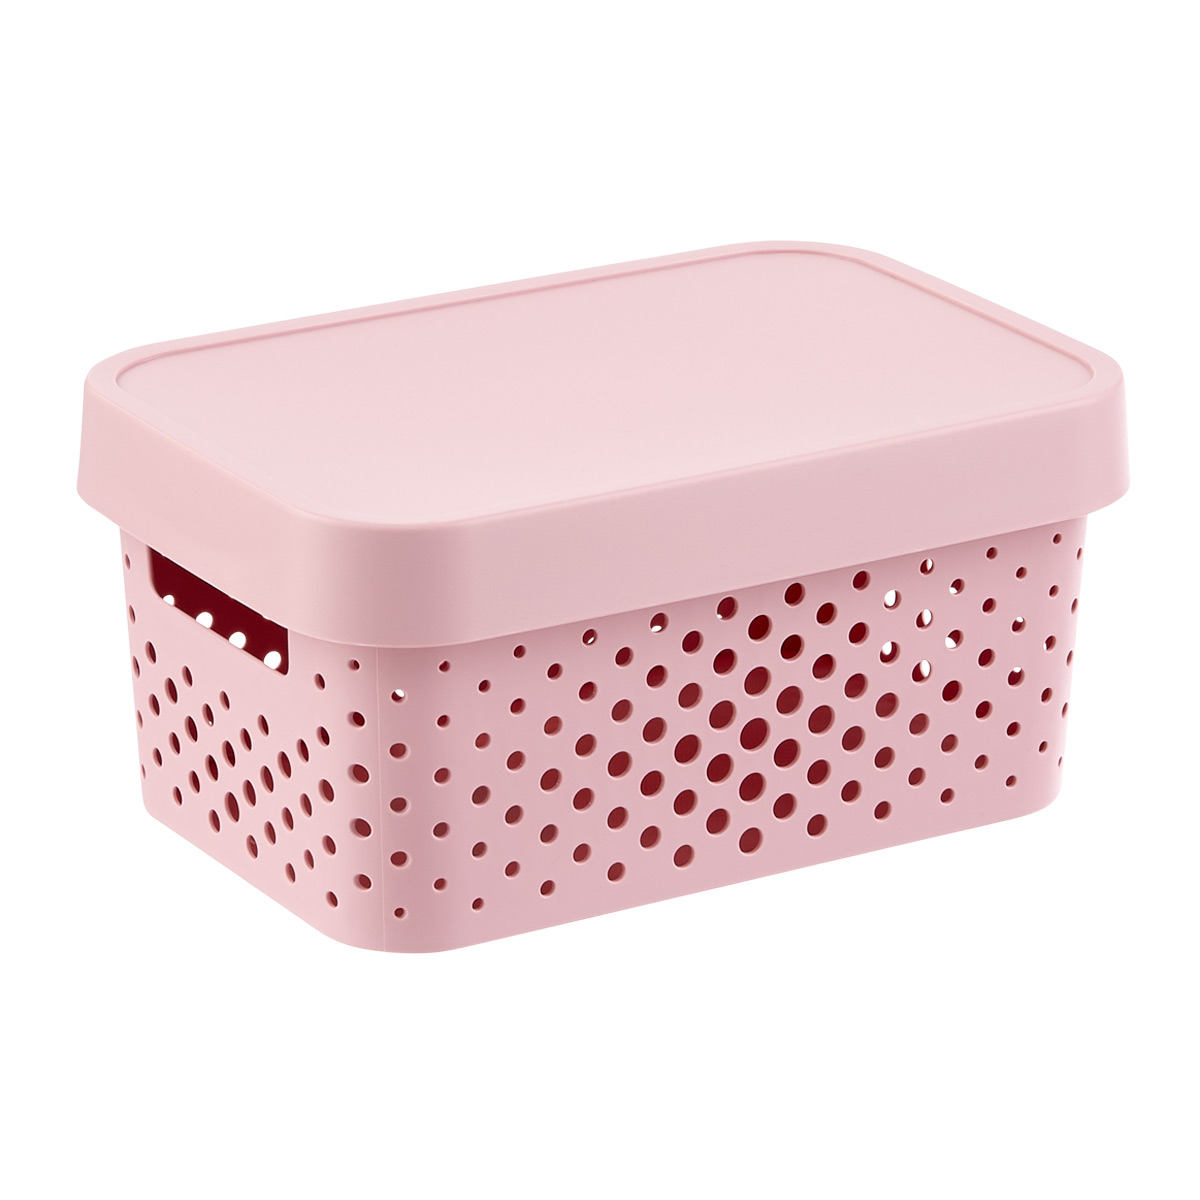 https://www.containerstore.com/catalogimages/408243/10083376_curver_small_infinity_box_w.jpg